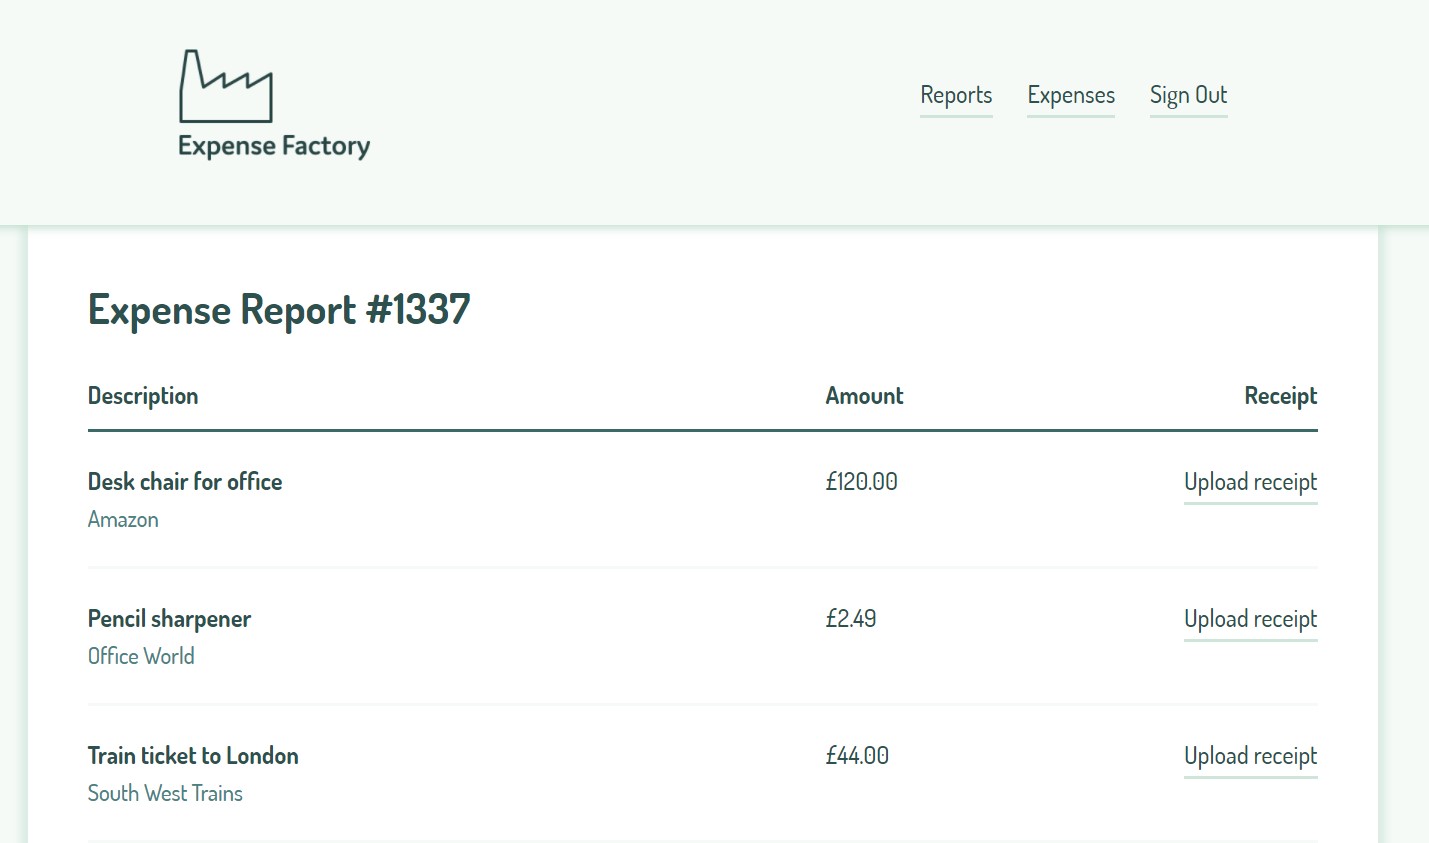 Screenshot of Expense Factory showing Expense Report #1337 with three items, each with an “Upload Receipt” button on the right hand side